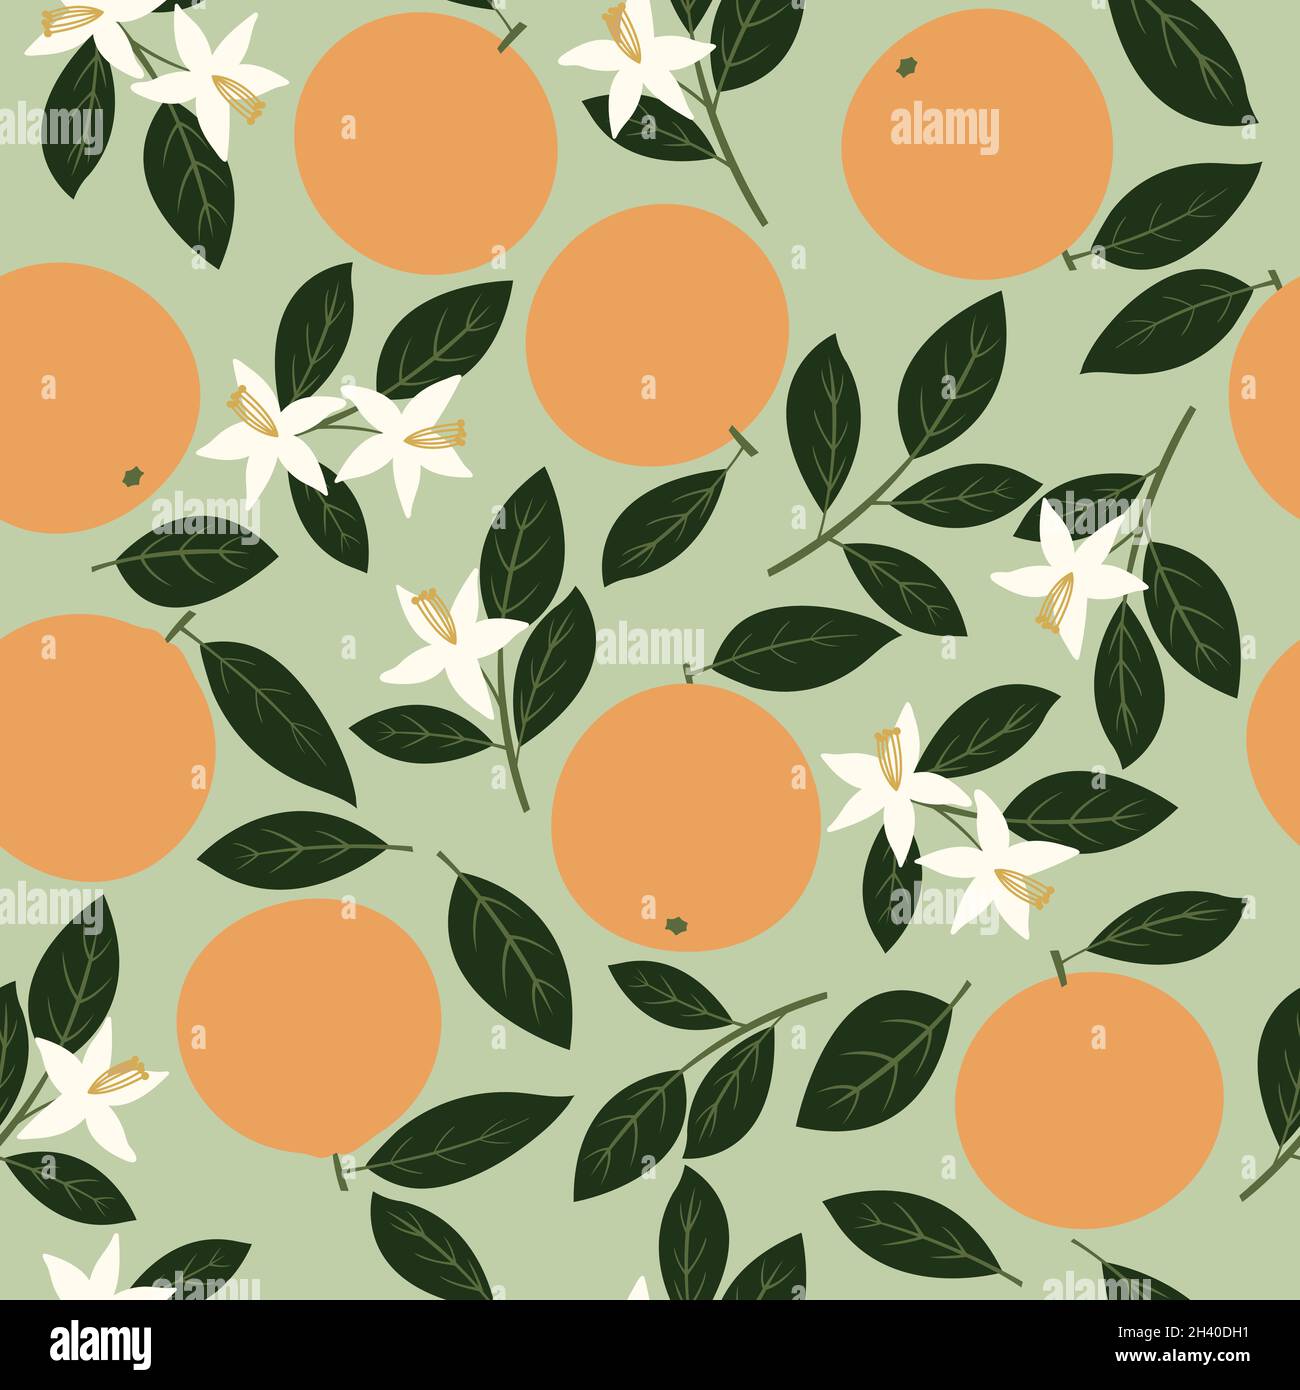 PATTERNS Lemons and Oranges Stained Glass Patterns Digital